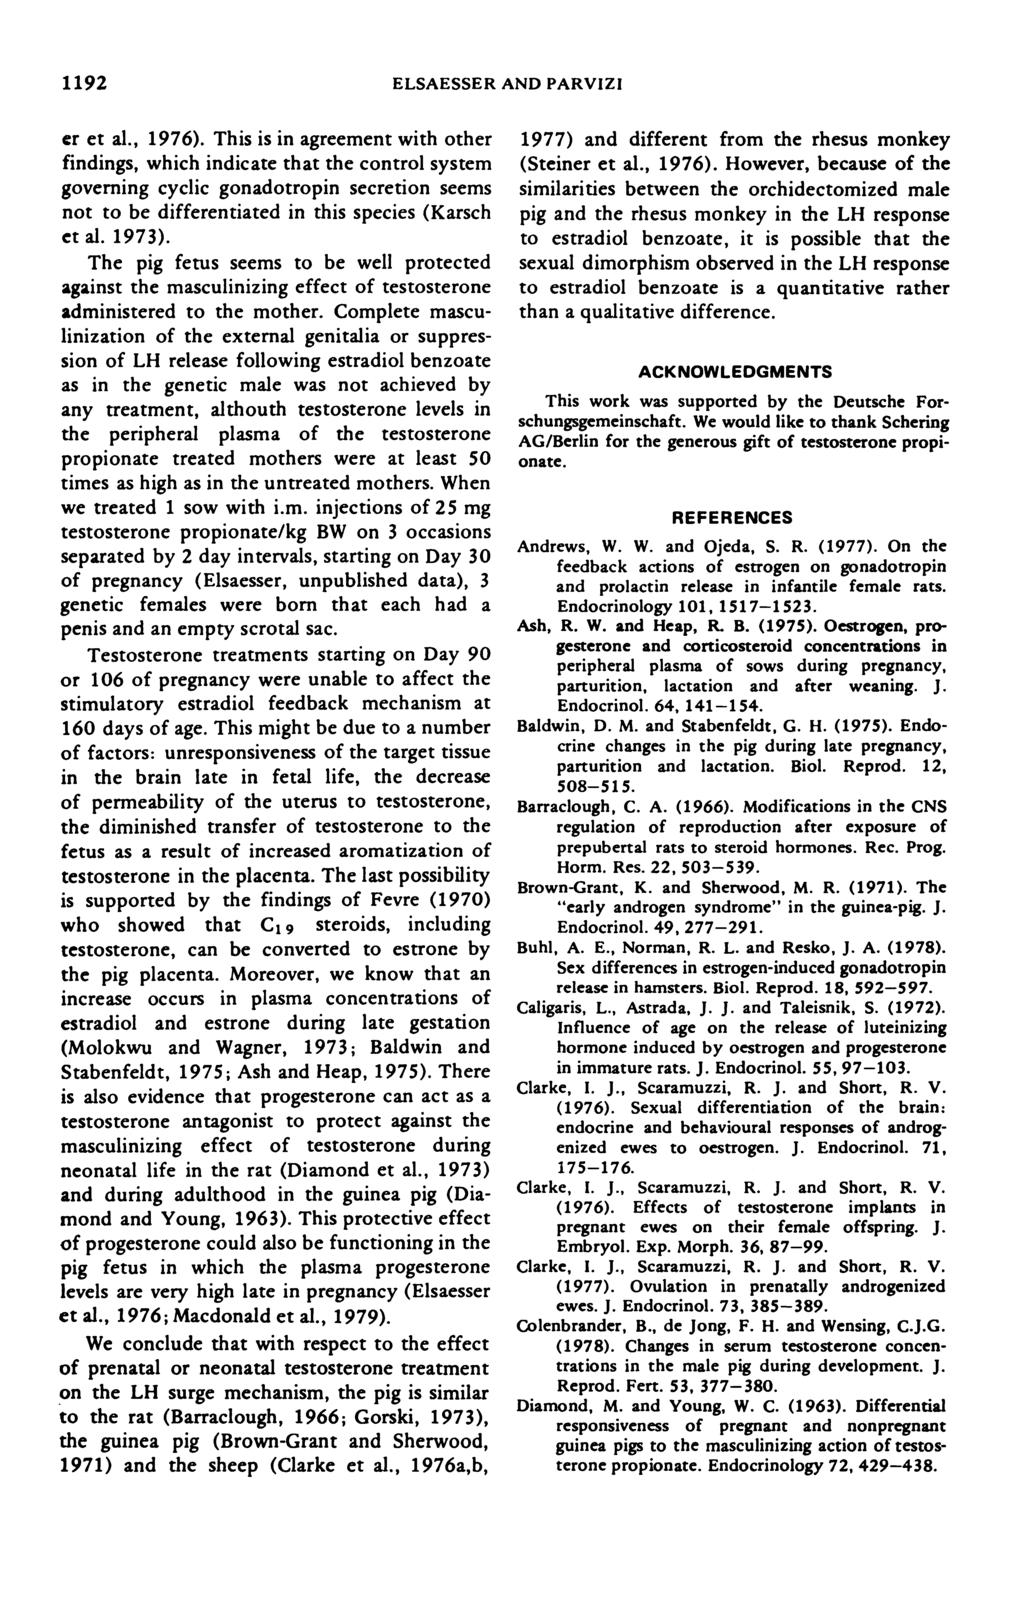 1192 ELSAESSER AD PARVZ er et al, 1976) This is in agreement with other findings, which indicate that the control system governing cyclic gonadotropin secretion seems not to be differentiated in this